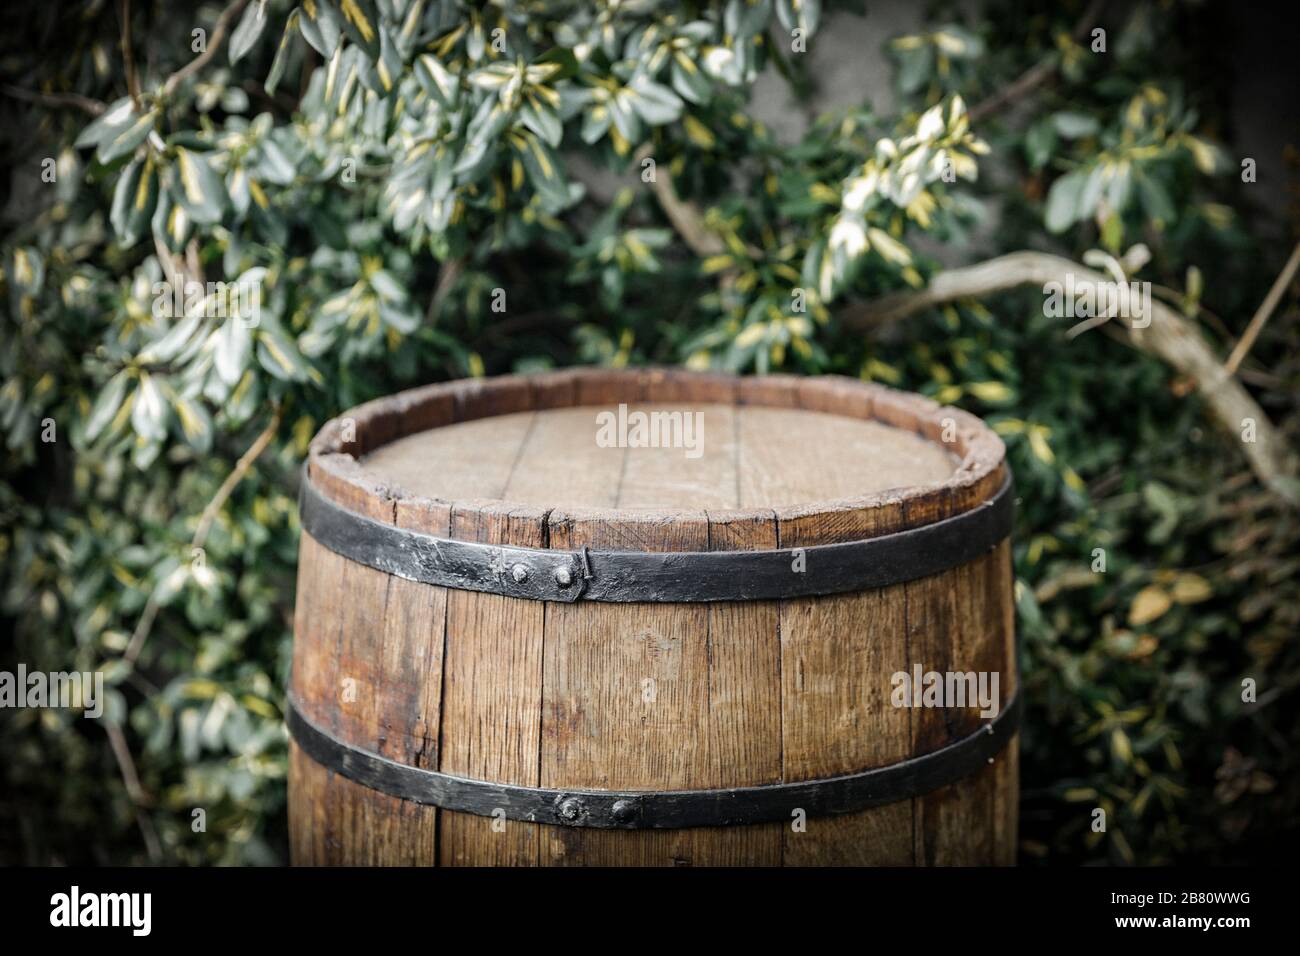 Old wooden barrel as a table with space for an advertising product. Green plants garden background. Stock Photo